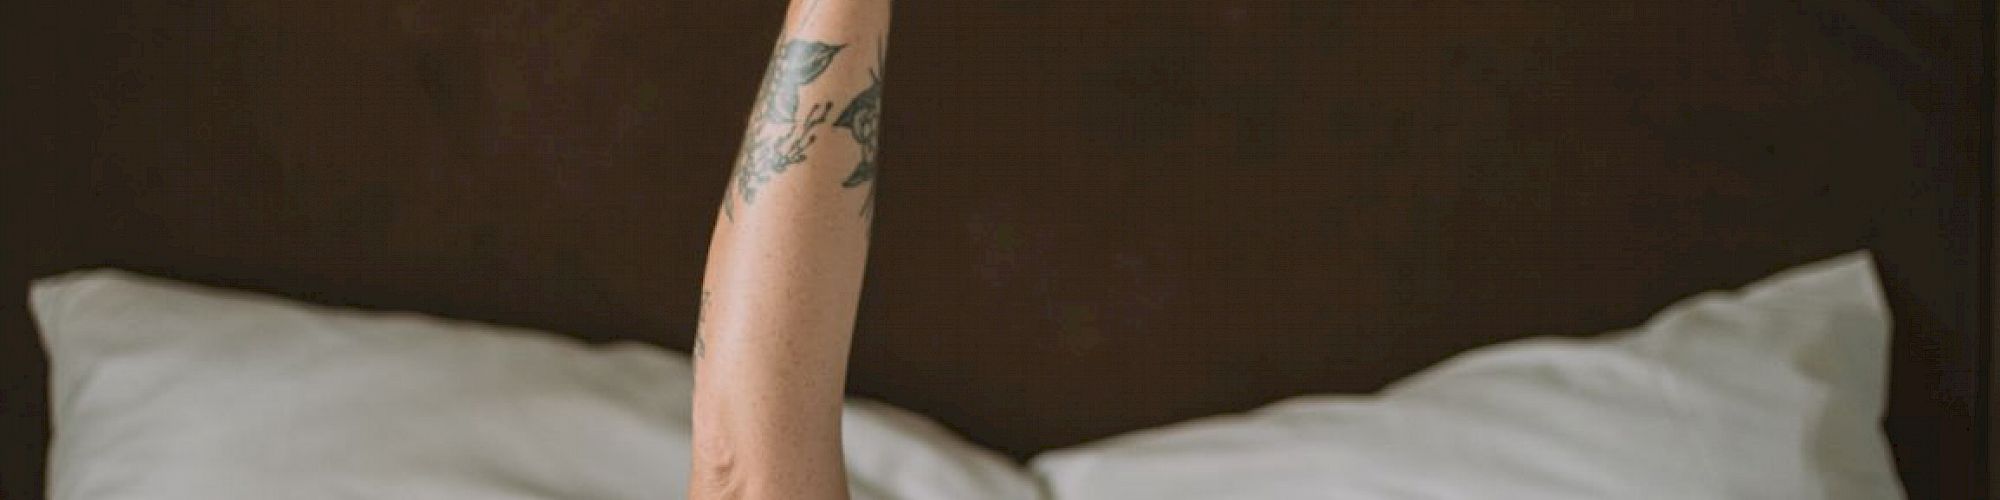 An arm with tattoos extends from beneath white bed covers, holding a white mug against a dark background.